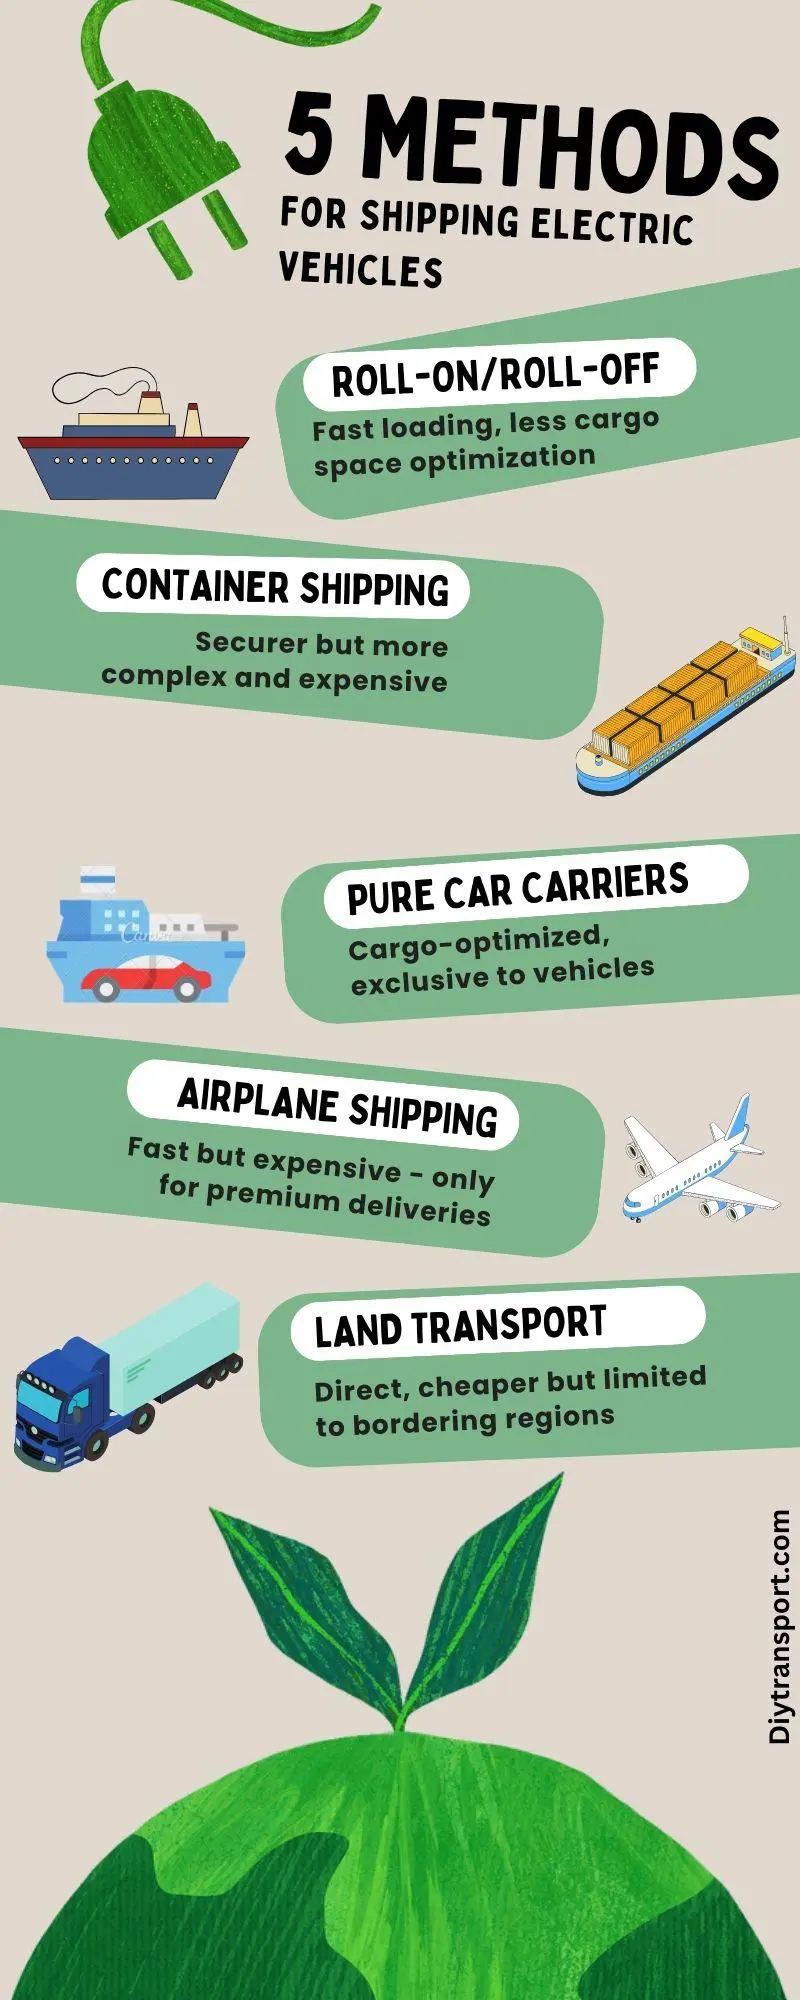 Shipping Electric Vehicles Overseas - 5 Methods Explained